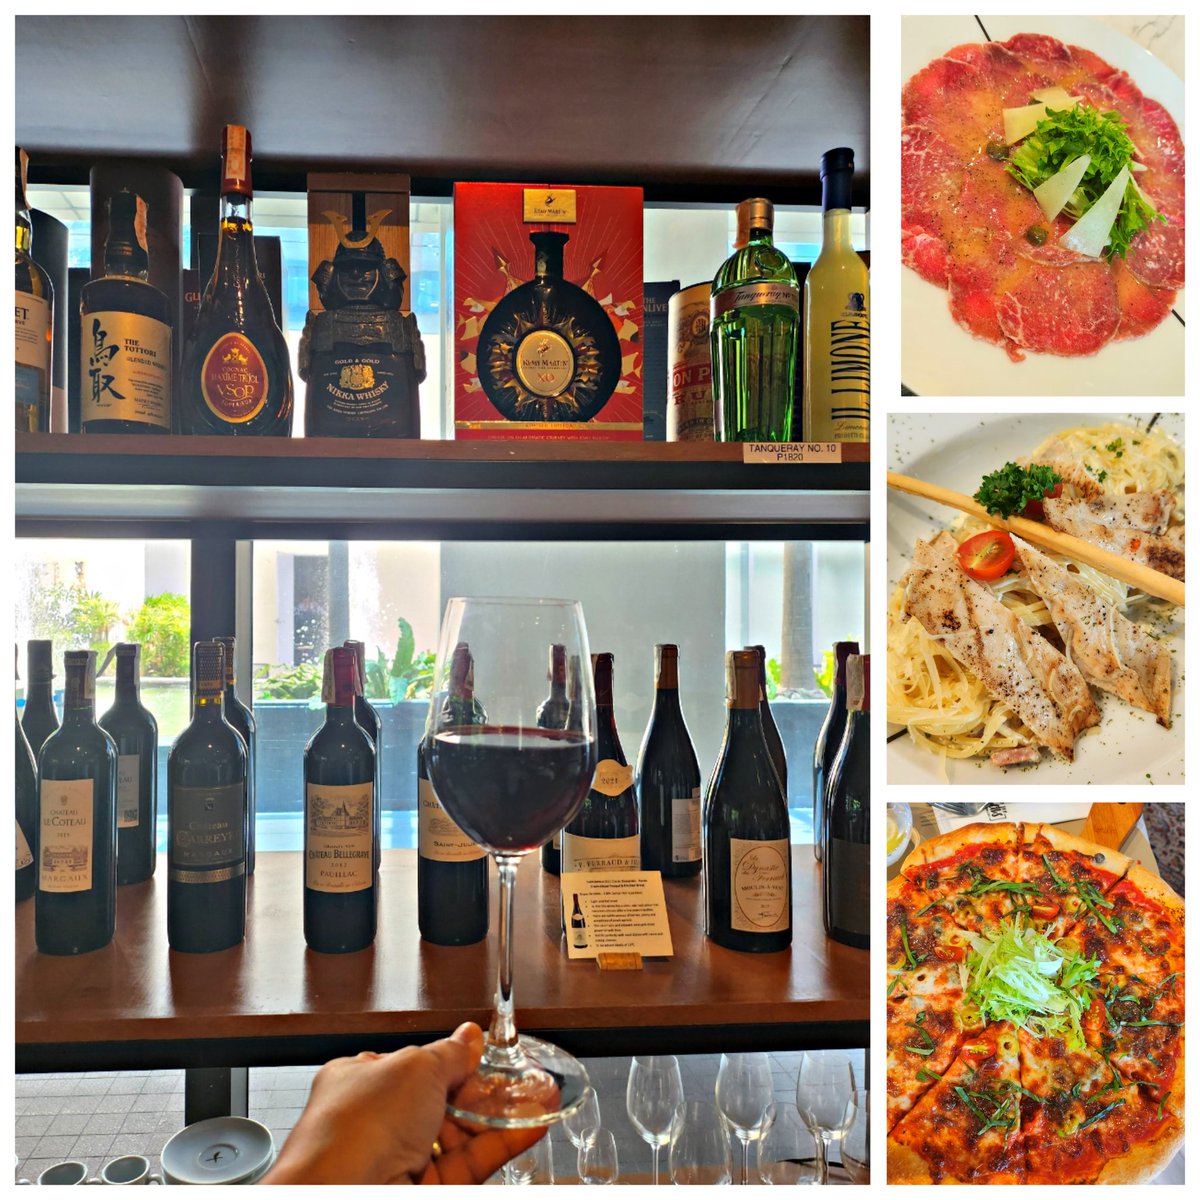 Edi's Taverna & Deli today #Foodie

If you need a wine supplier to your restaurants, please message us.
Here is the list of our wines 🔻:
shop.lecellier-wines.com

#wineanddine #winelovers #winesupplierphilippines #lecellierwineselection #diningnearme